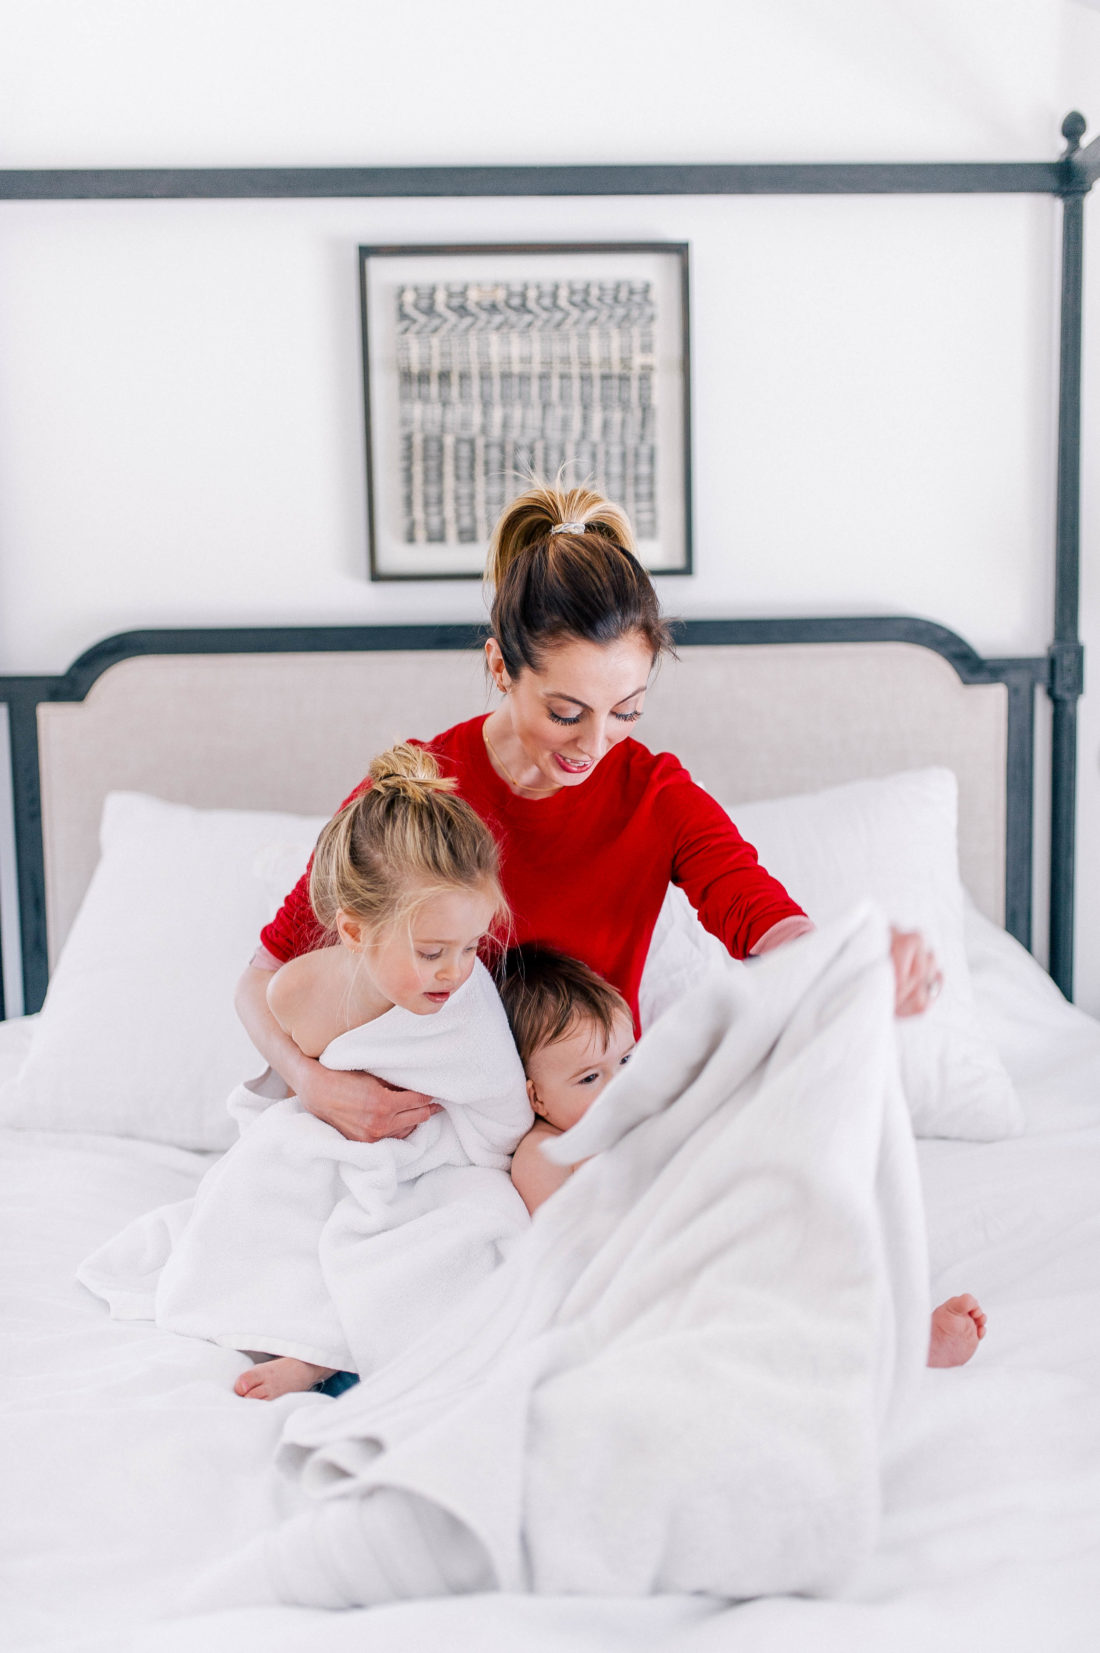 Eva Amurri Martino wrangles one year old son, Major, and three year old daughter, Marlowe as she goes through her solo bedtime routine in their connecticut home